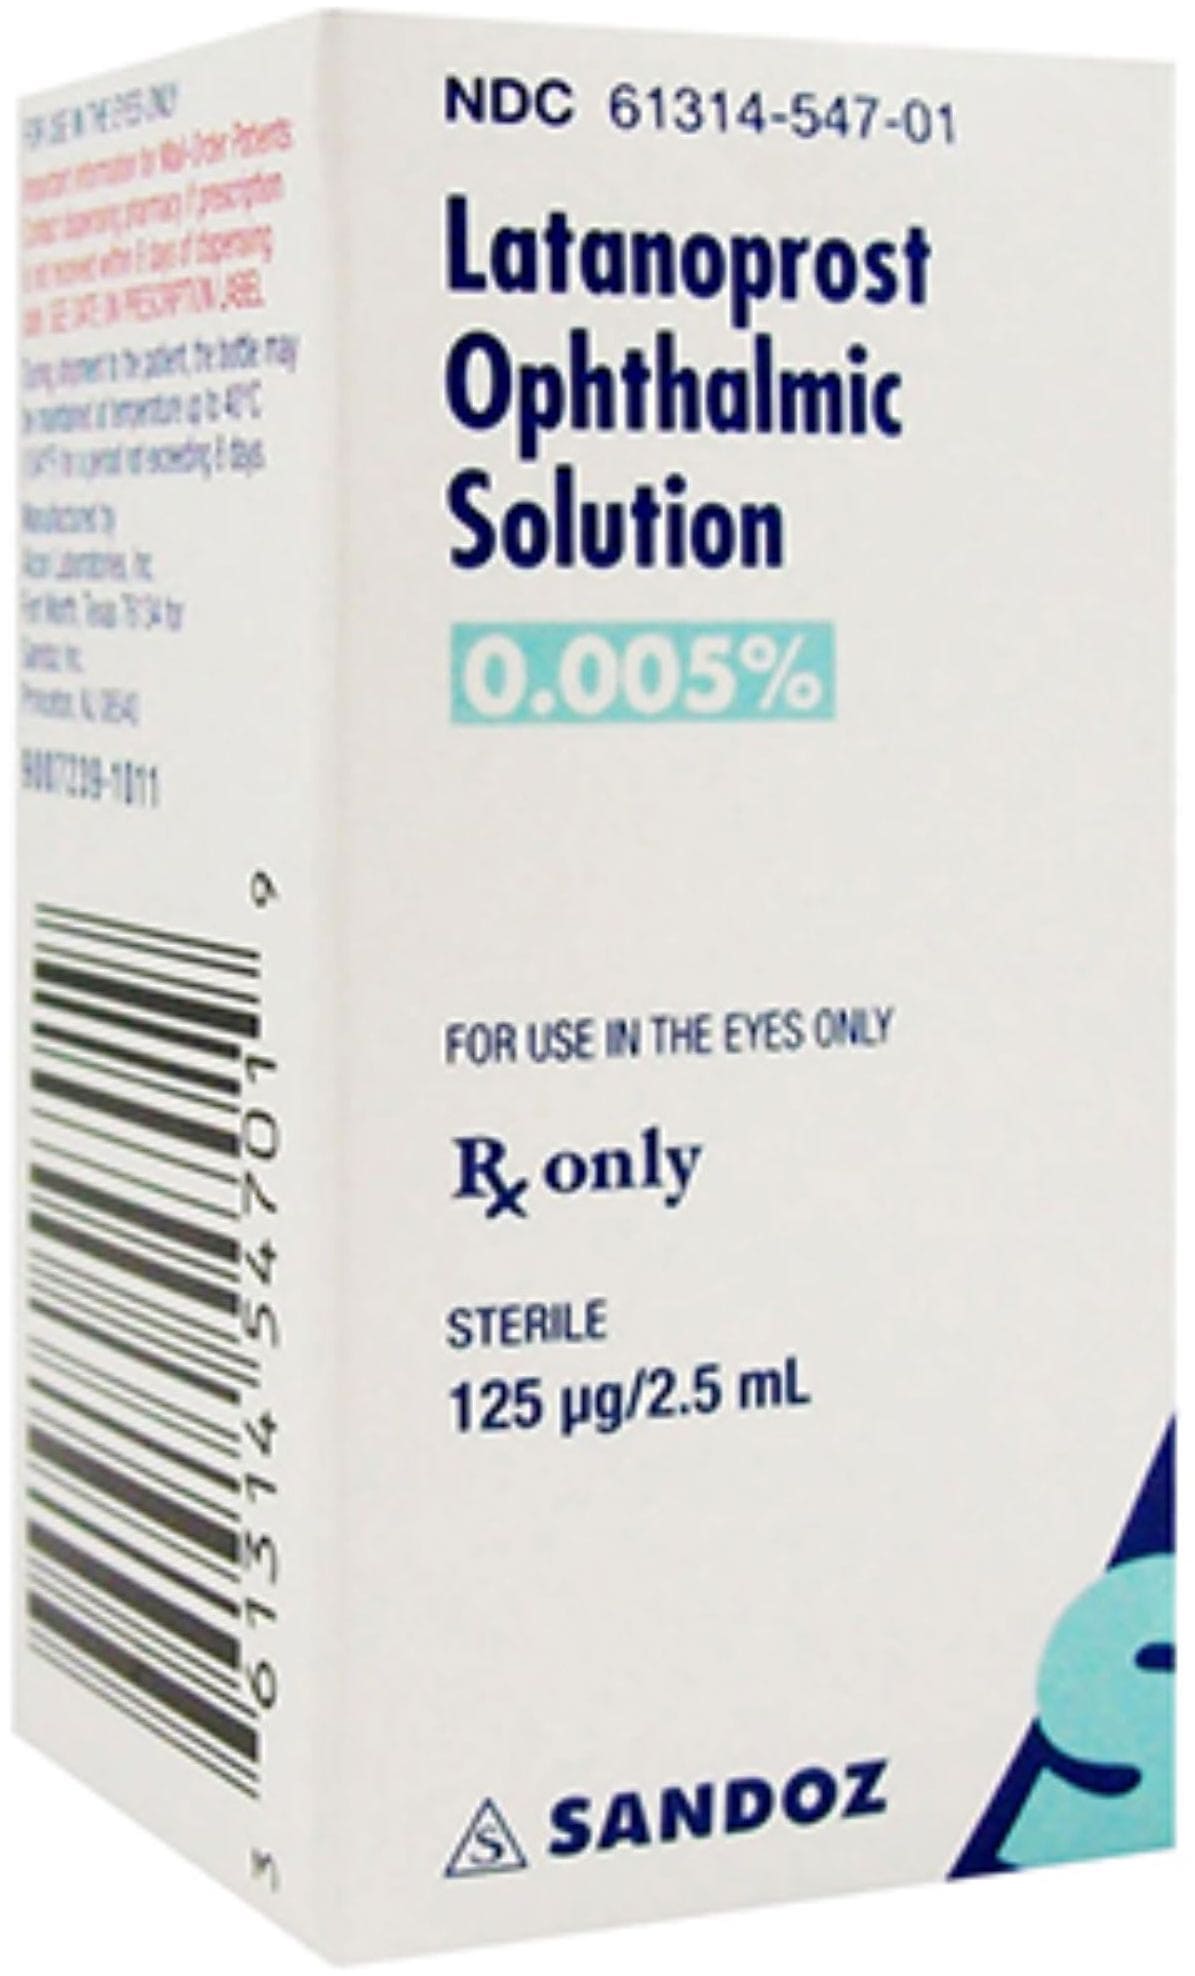 Latanoprost Ophthalmic Solution